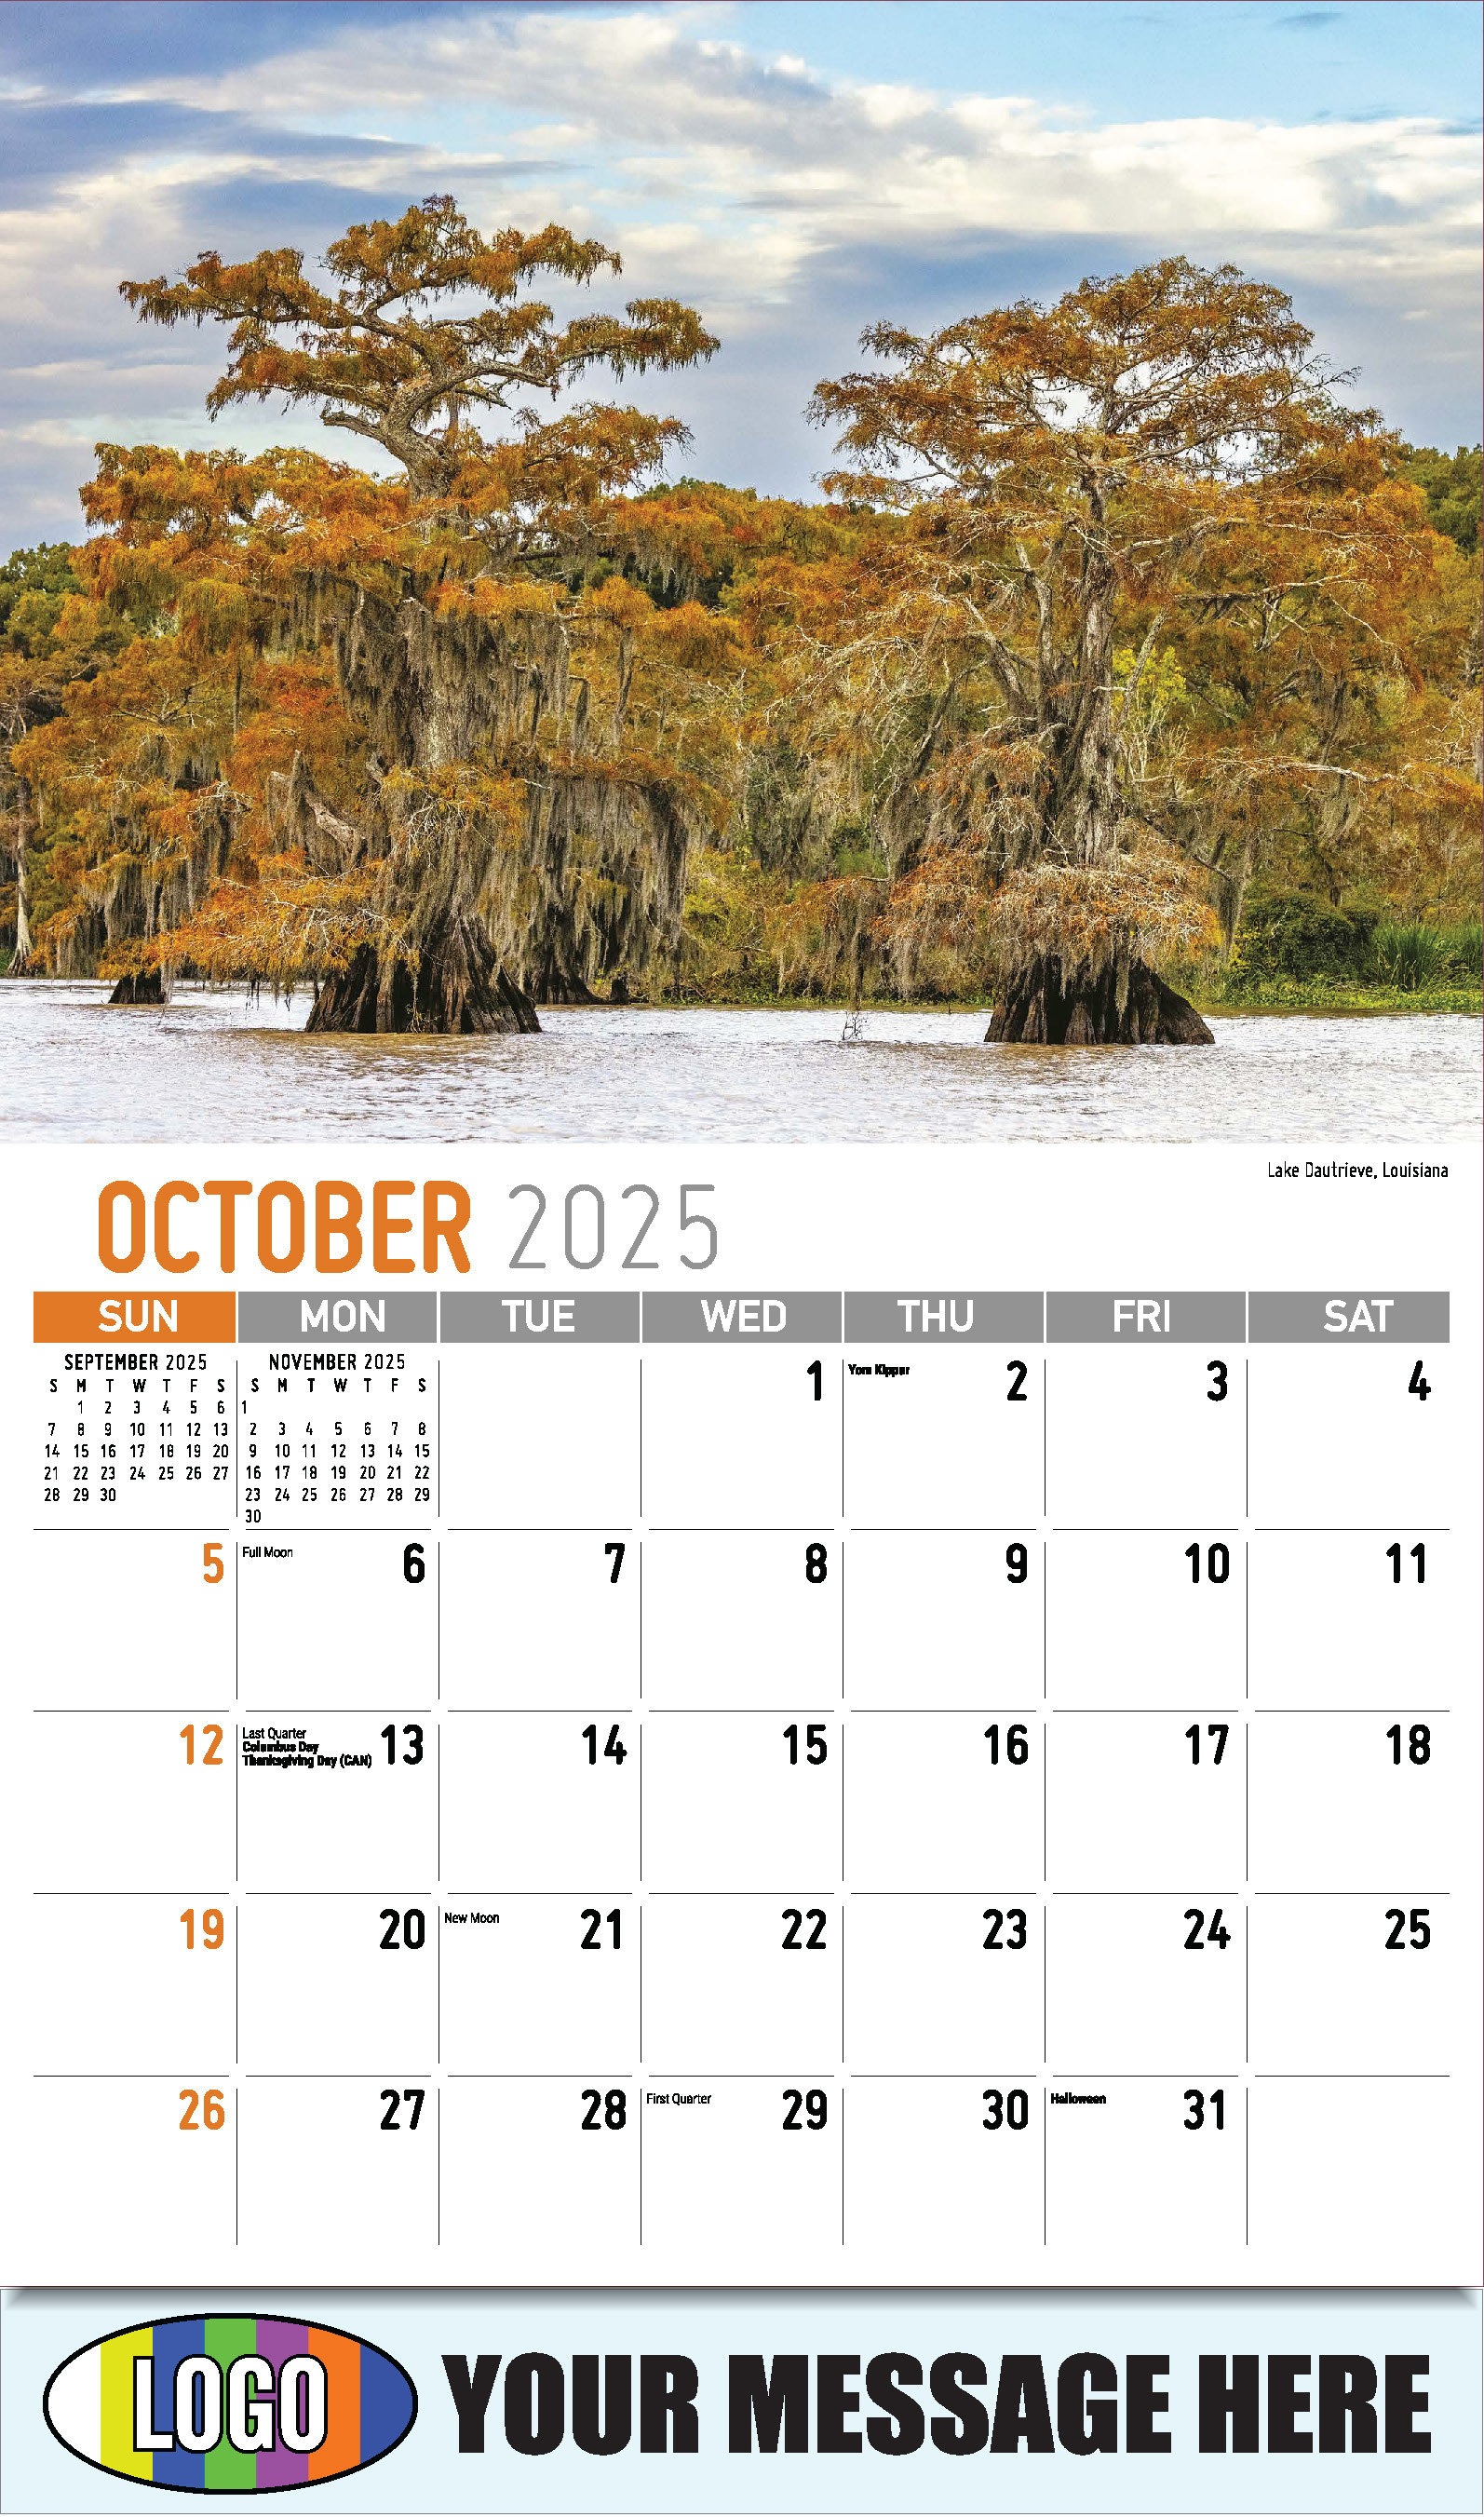 Scenes of Southeast USA 2025 Business Promo Wall Calendar - October